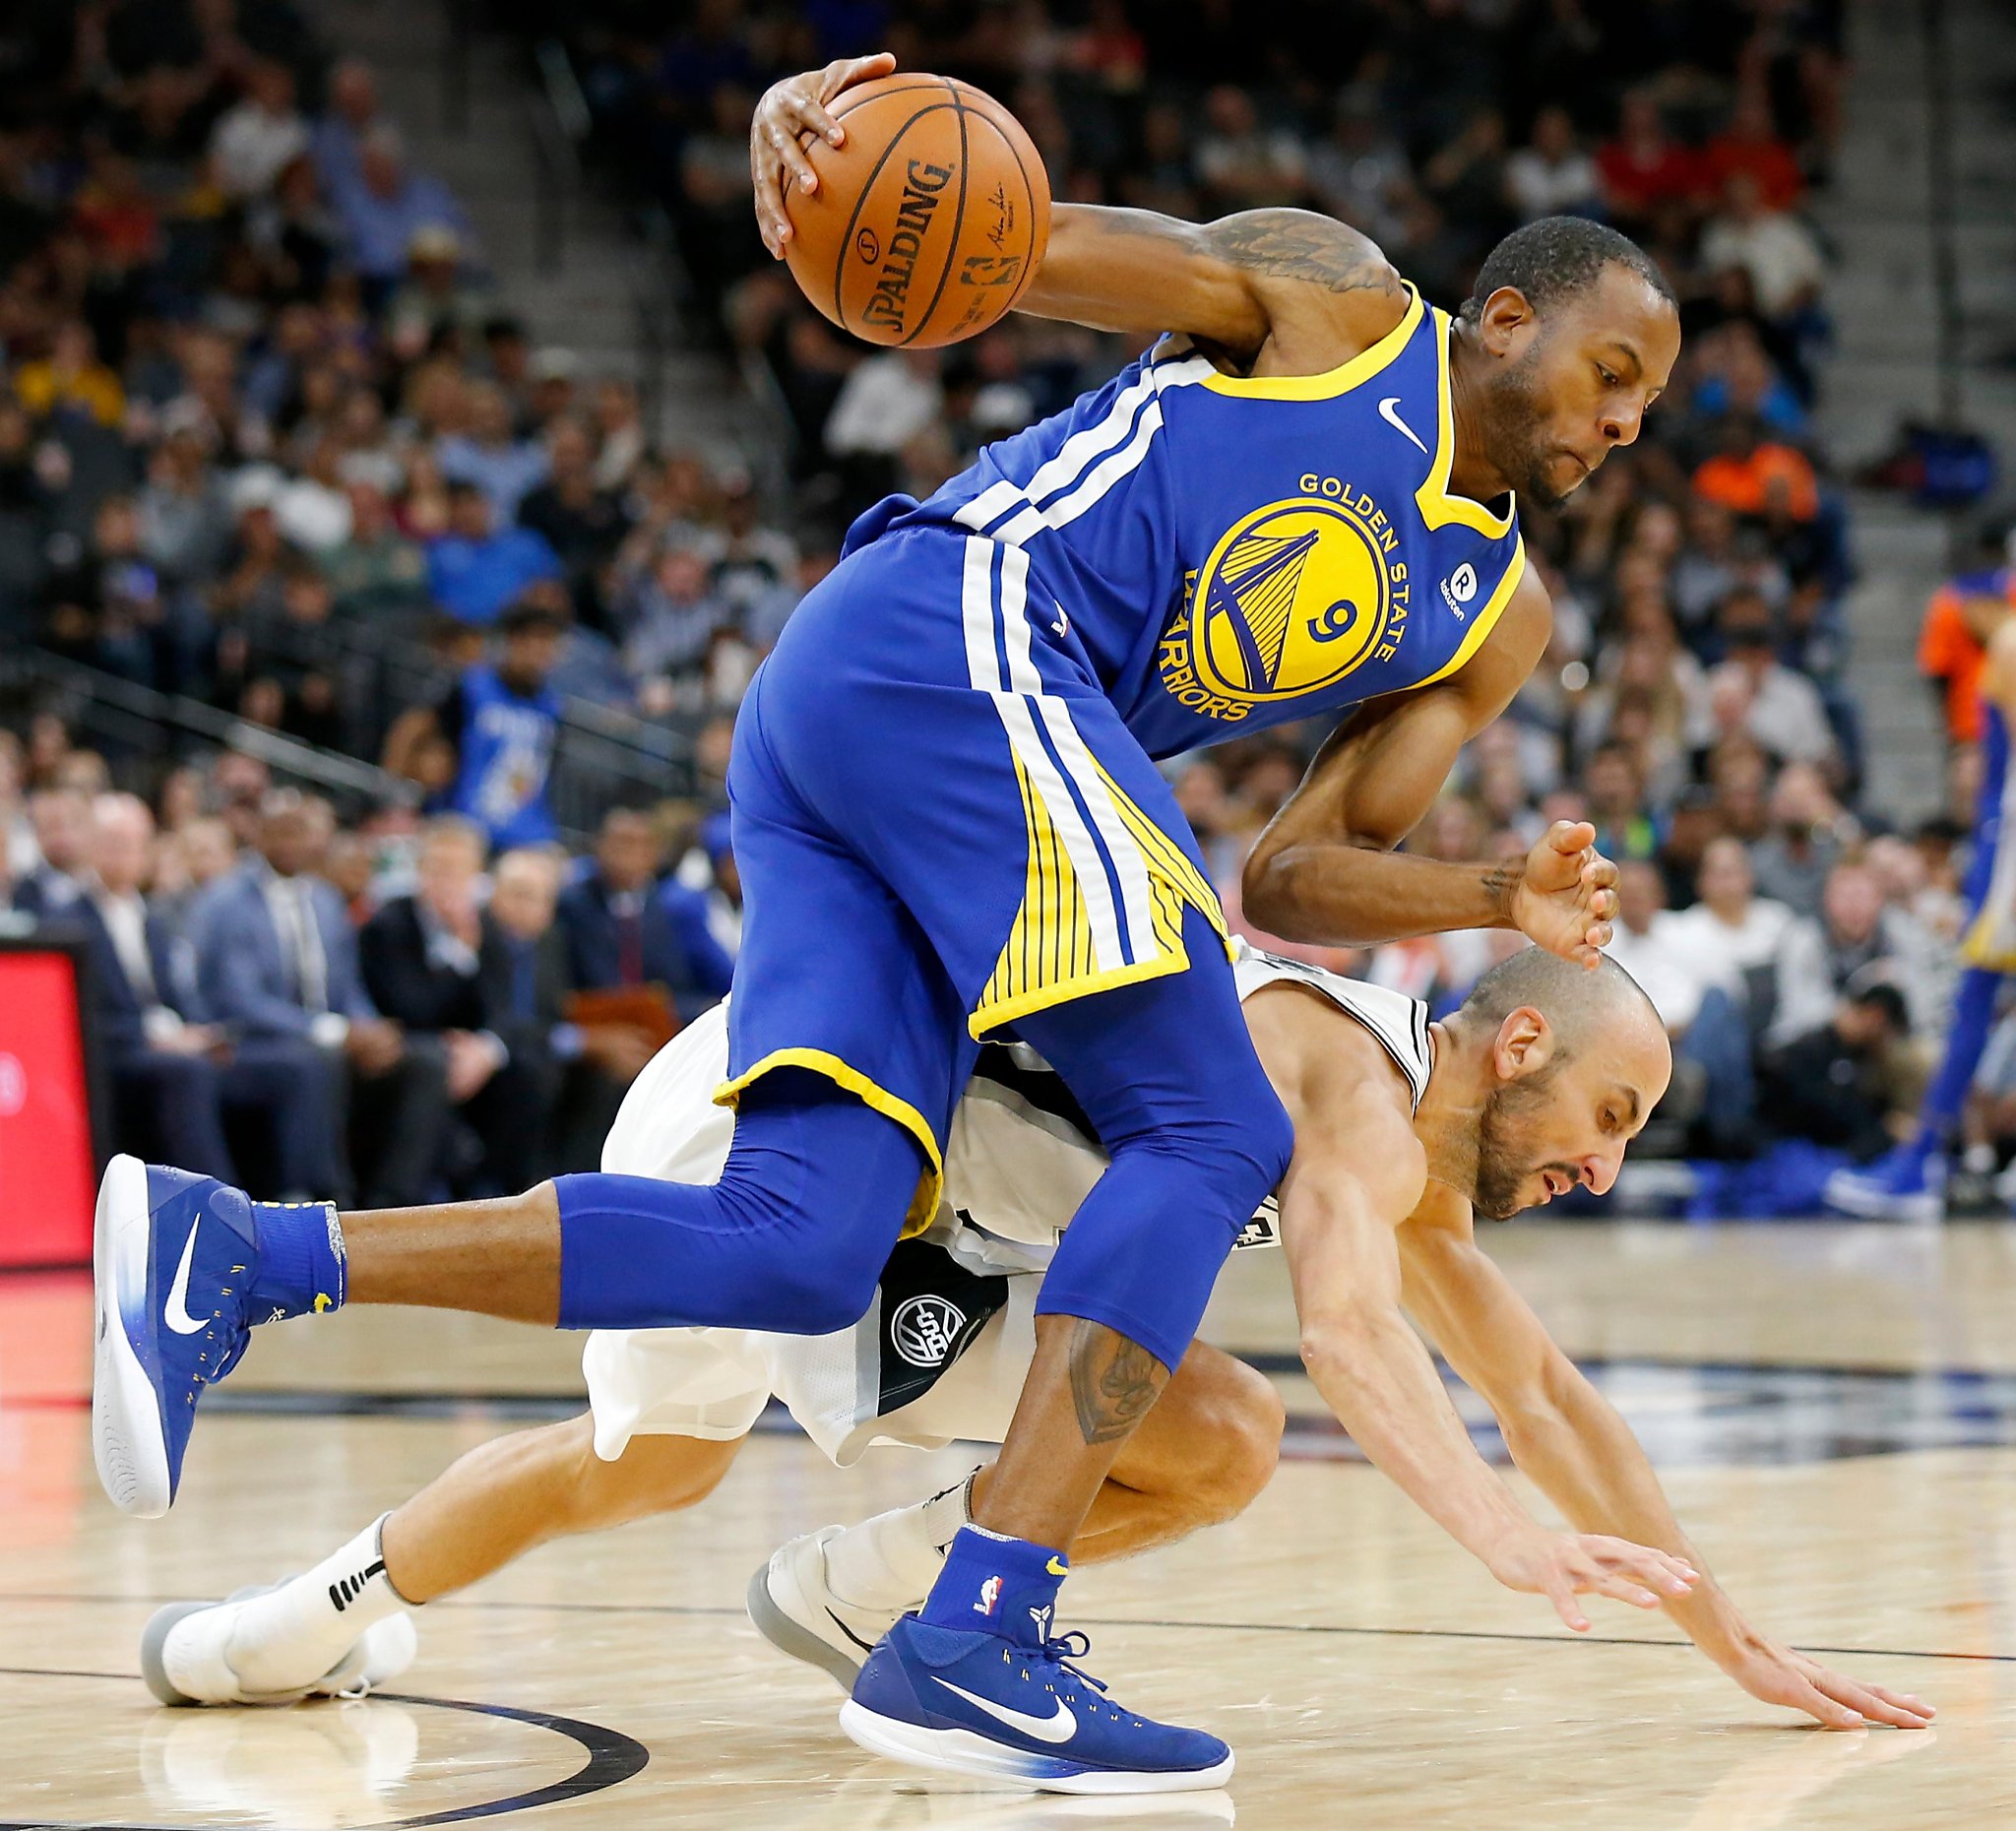 Warriors’ Andre Iguodala to rest vs. 76ers - SFChronicle.com2048 x 1860